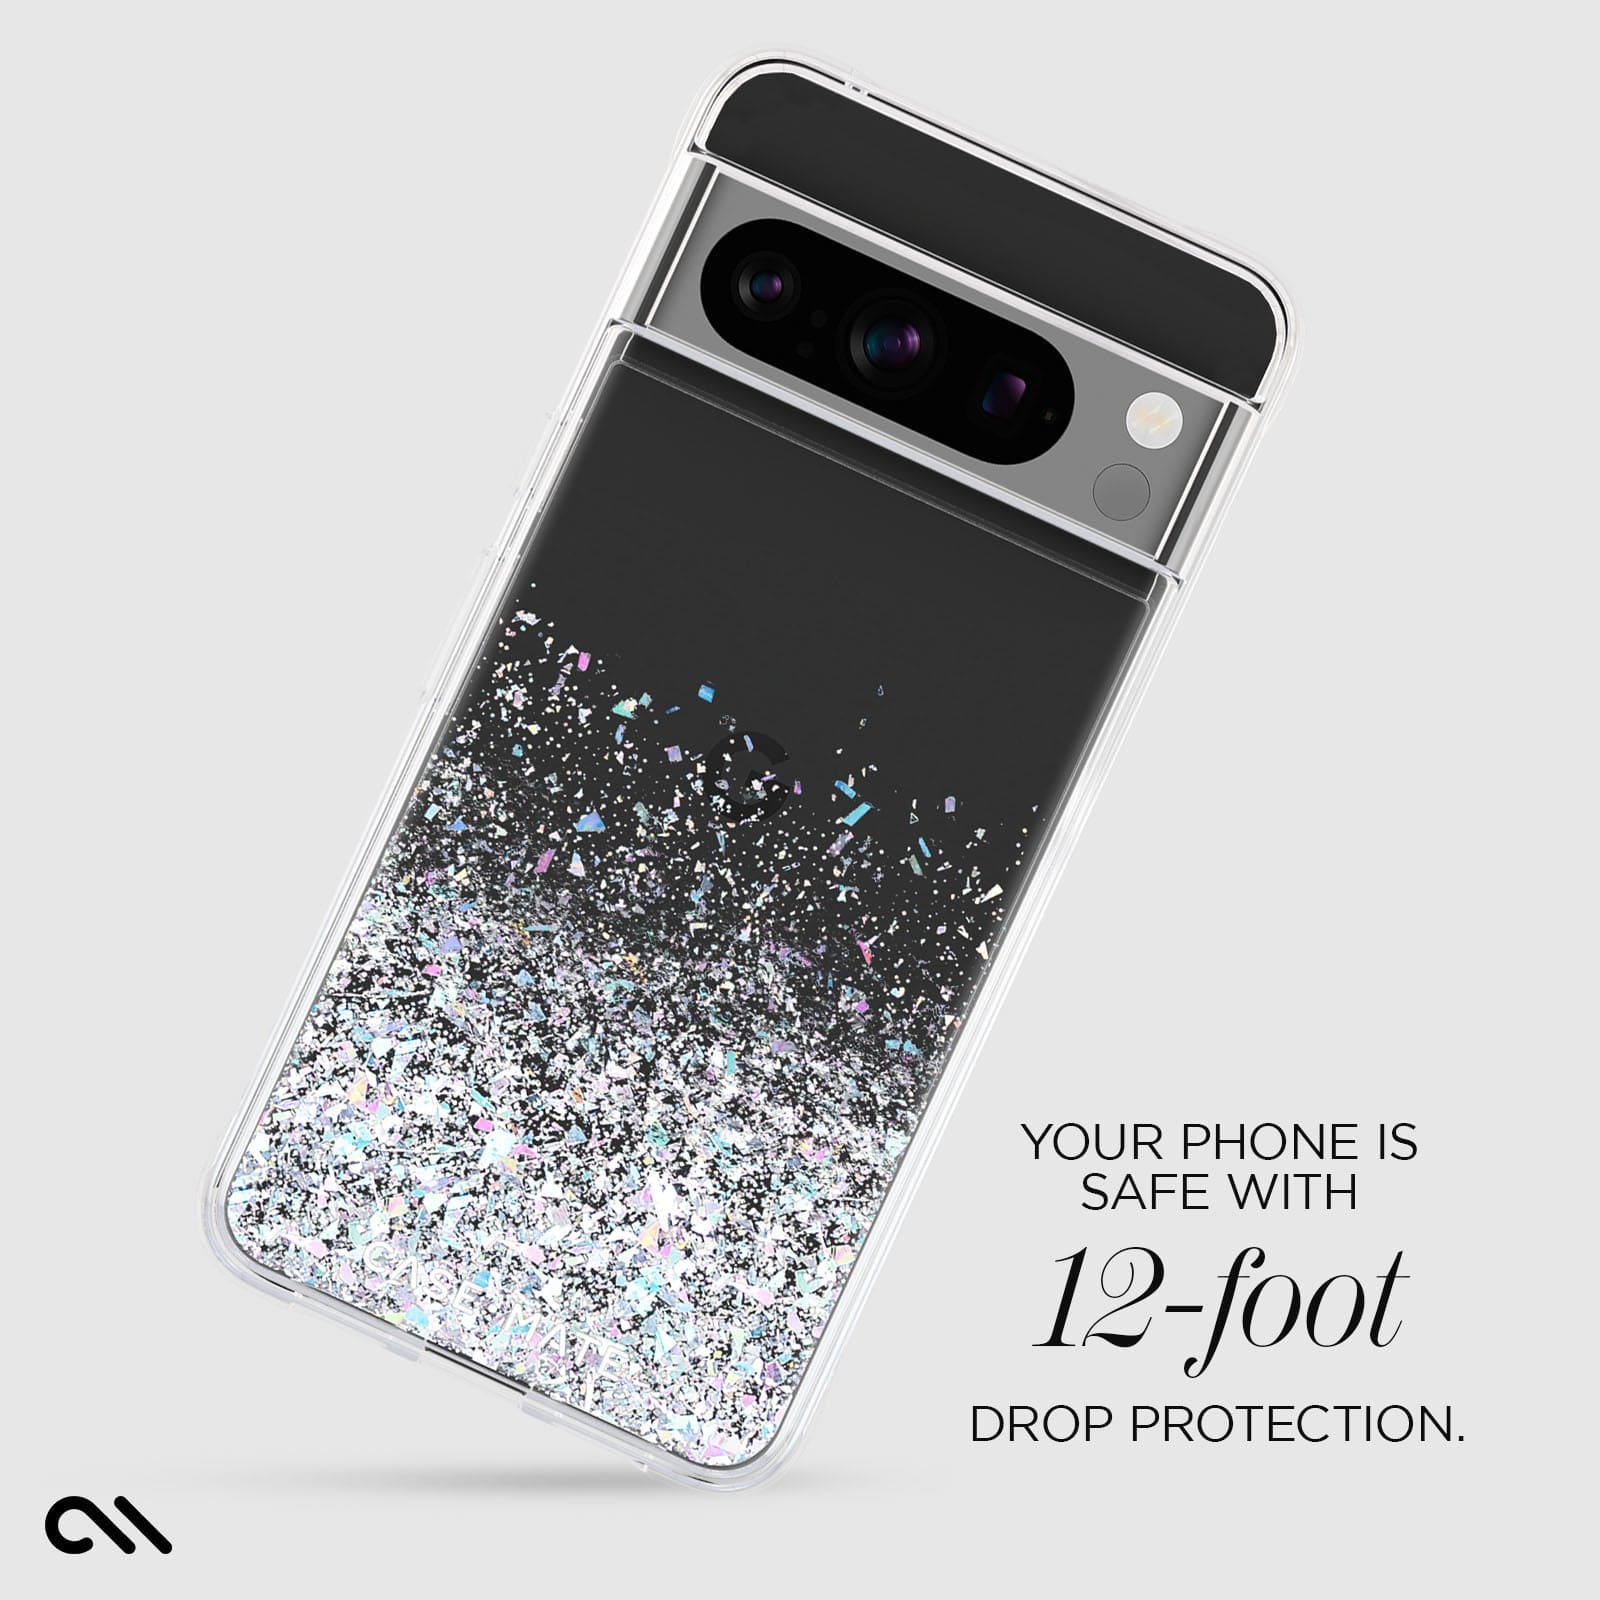 YOUR PHONE IS SAFE WITH 12 FOOT DROP PROTECTION